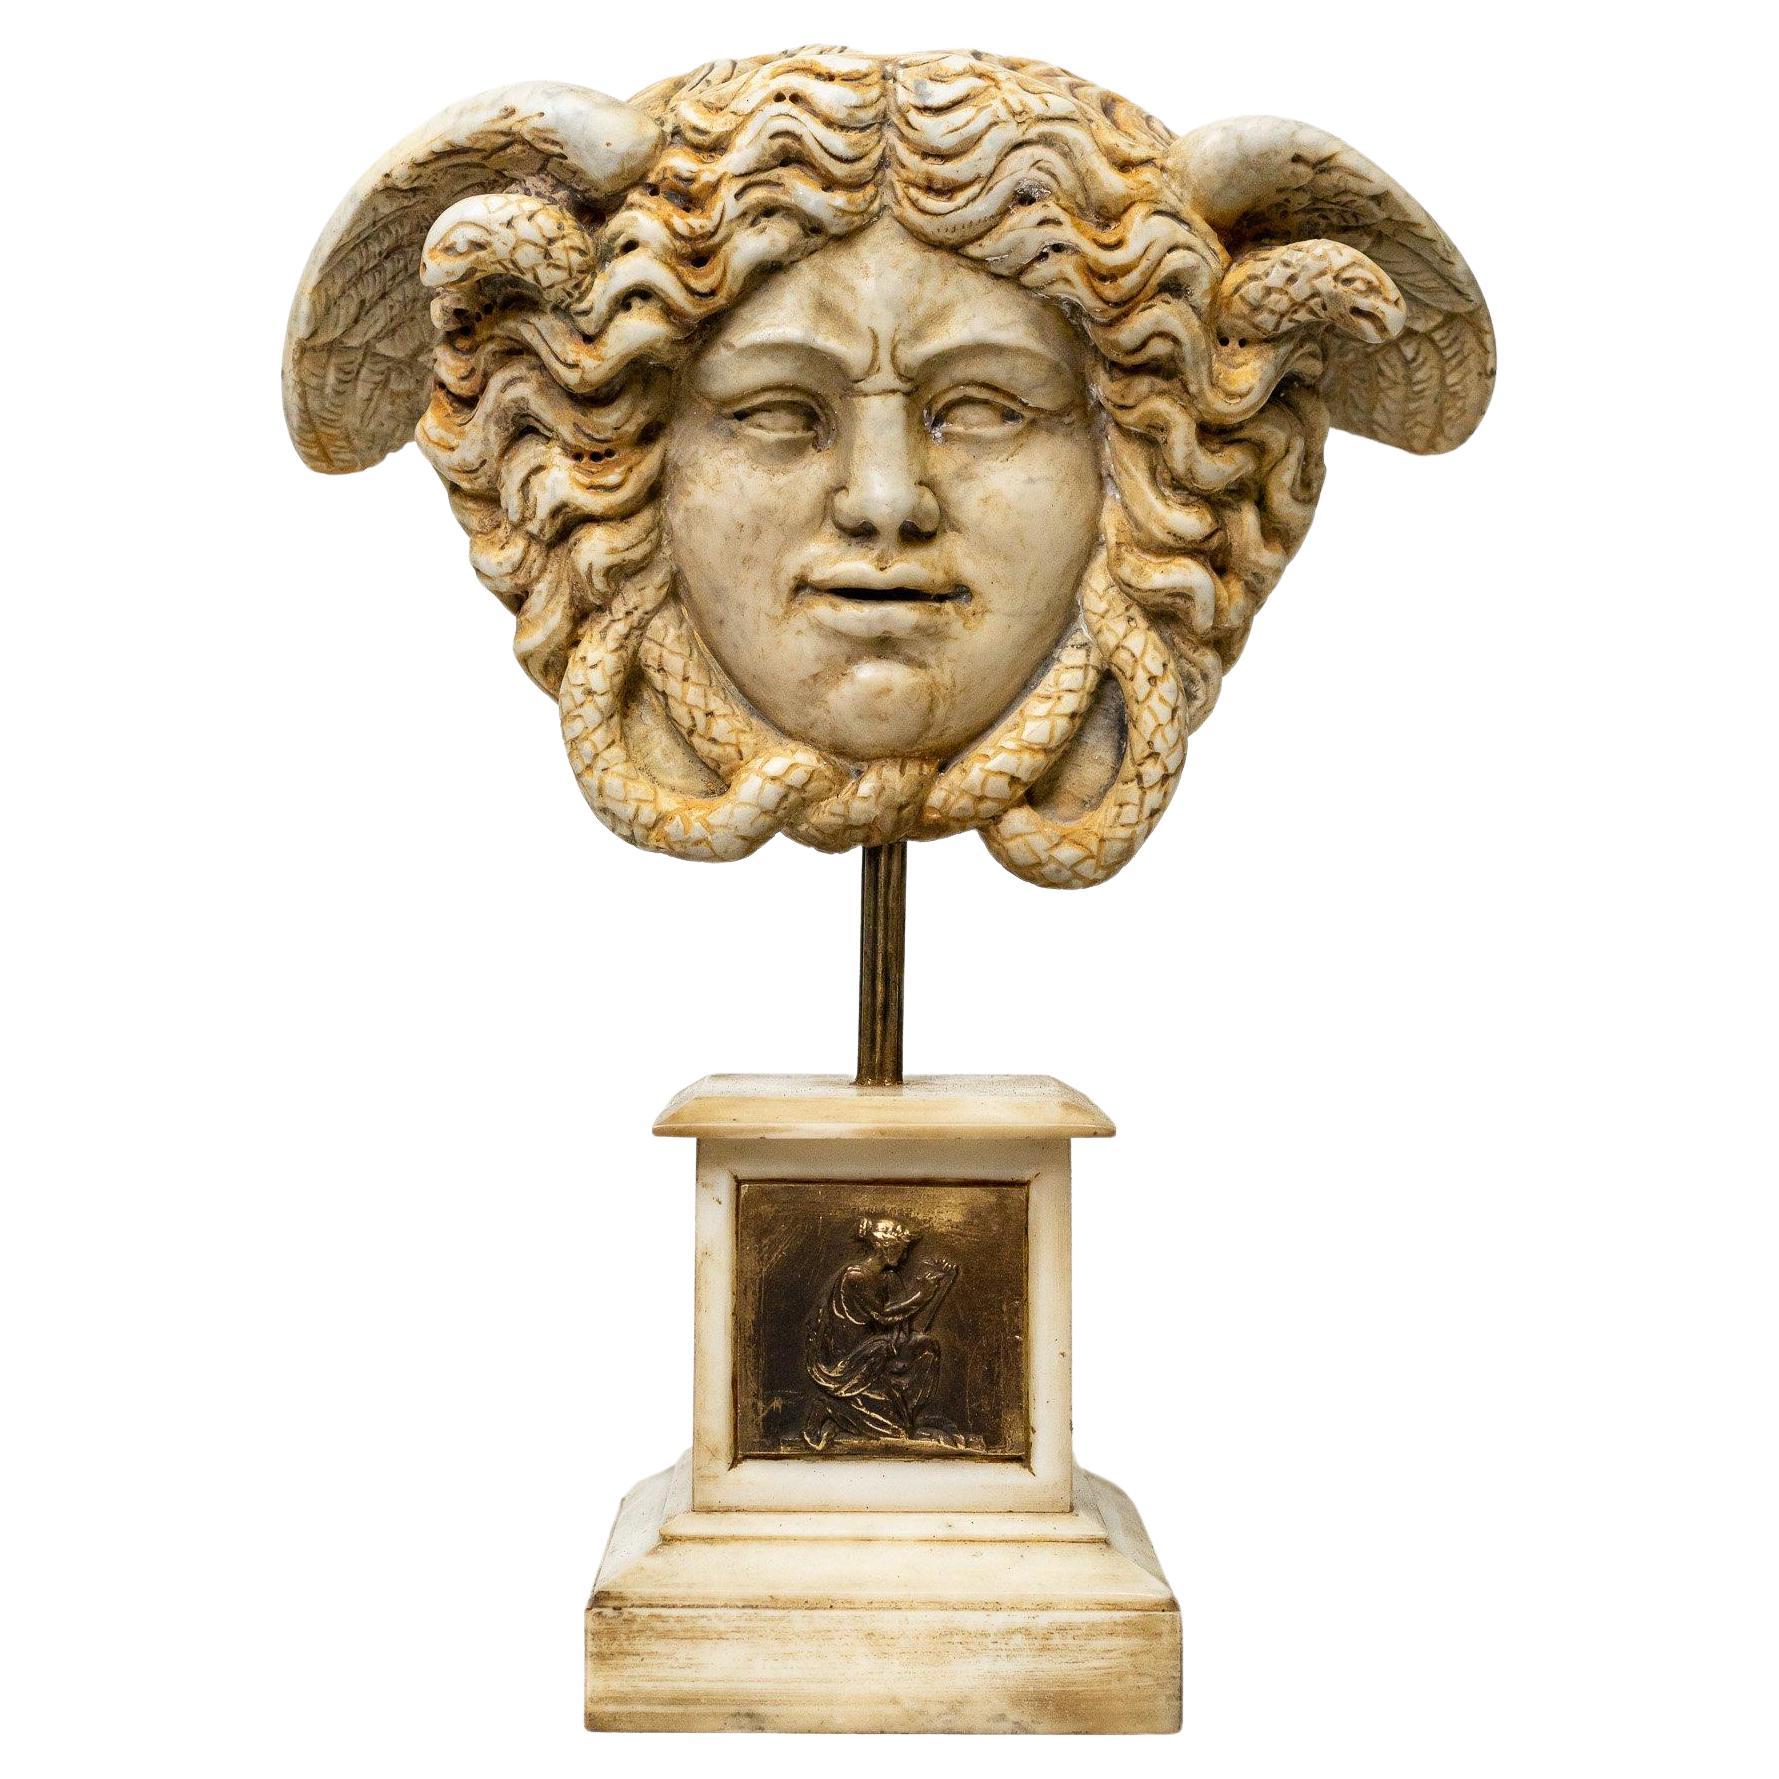 Are there any statues of Medusa?